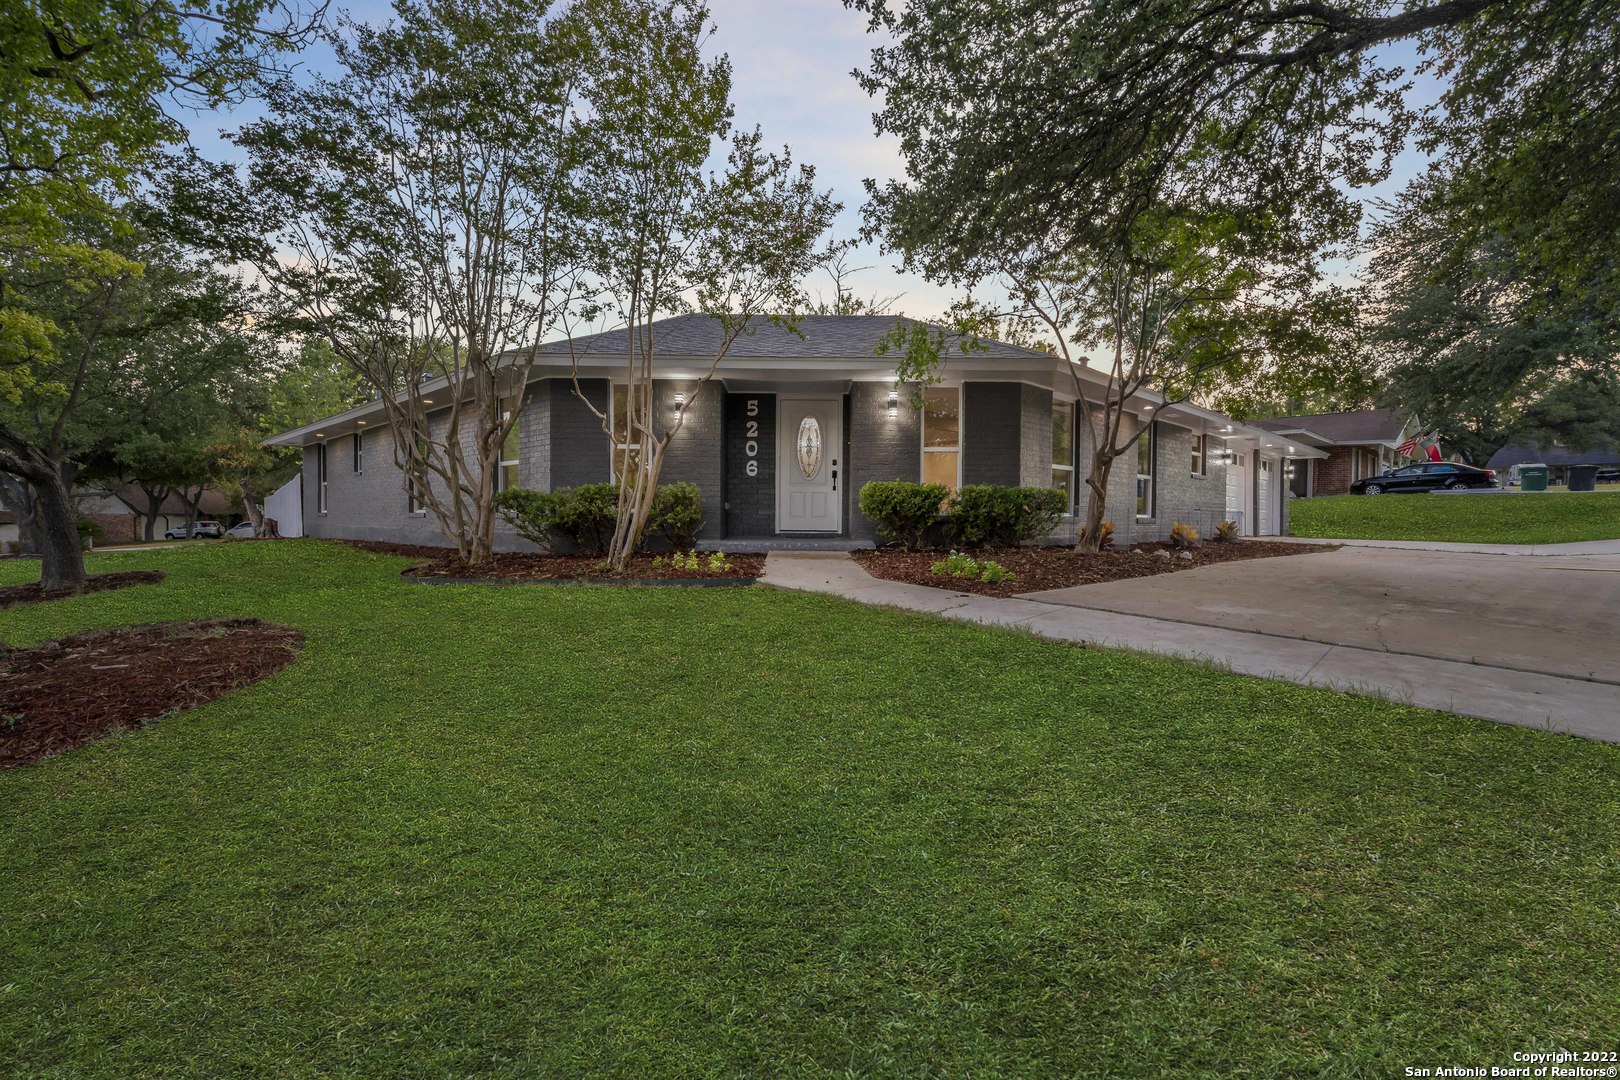 This elegant 4-bed, 2-bath single-story home sits on a spacious 0.35-acre corner lot on a tree-lined street in highly desirable Northern San Antonio, just minutes from the medical center with a full TWO-CAR GARAGE! The thoughtfully landscaped grounds with mature trees invite you into the front yard. Upon entrance, you are warmly greeted by a brick fireplace, fresh paint, and meticulous attention to detail in the kitchen with new granite countertops, customized backsplash, and brand-name appliances in all stainless steel, including the kitchen hood, oven/range, and dishwasher. The oversized owner's suite is complemented by a completely renovated bathroom and rainfall shower! The backyard is full of FUN! There is a large patio that provides plentiful space for gardening and entertaining. There includes an entire battery of new upgrades, including but not limited to: a new roof as of January 2022, new kitchen and bathroom cabinets, new tile flooring, faucets, completely remodeled kitchen and bathroom granite countertops, new backyard and chimney siding, new A/C unit and compressor with new ducts, new plumbing lines, lights, outlets, and ceiling fans. All windows, doors, and garage door openers are new, and bedrooms include closet organizers and new shelves. The attic is equipped with new blowing insulation, a new gas water heater, smoke alarms, a fuse box with breakers, and more--all recently replaced between March and June of 2022.